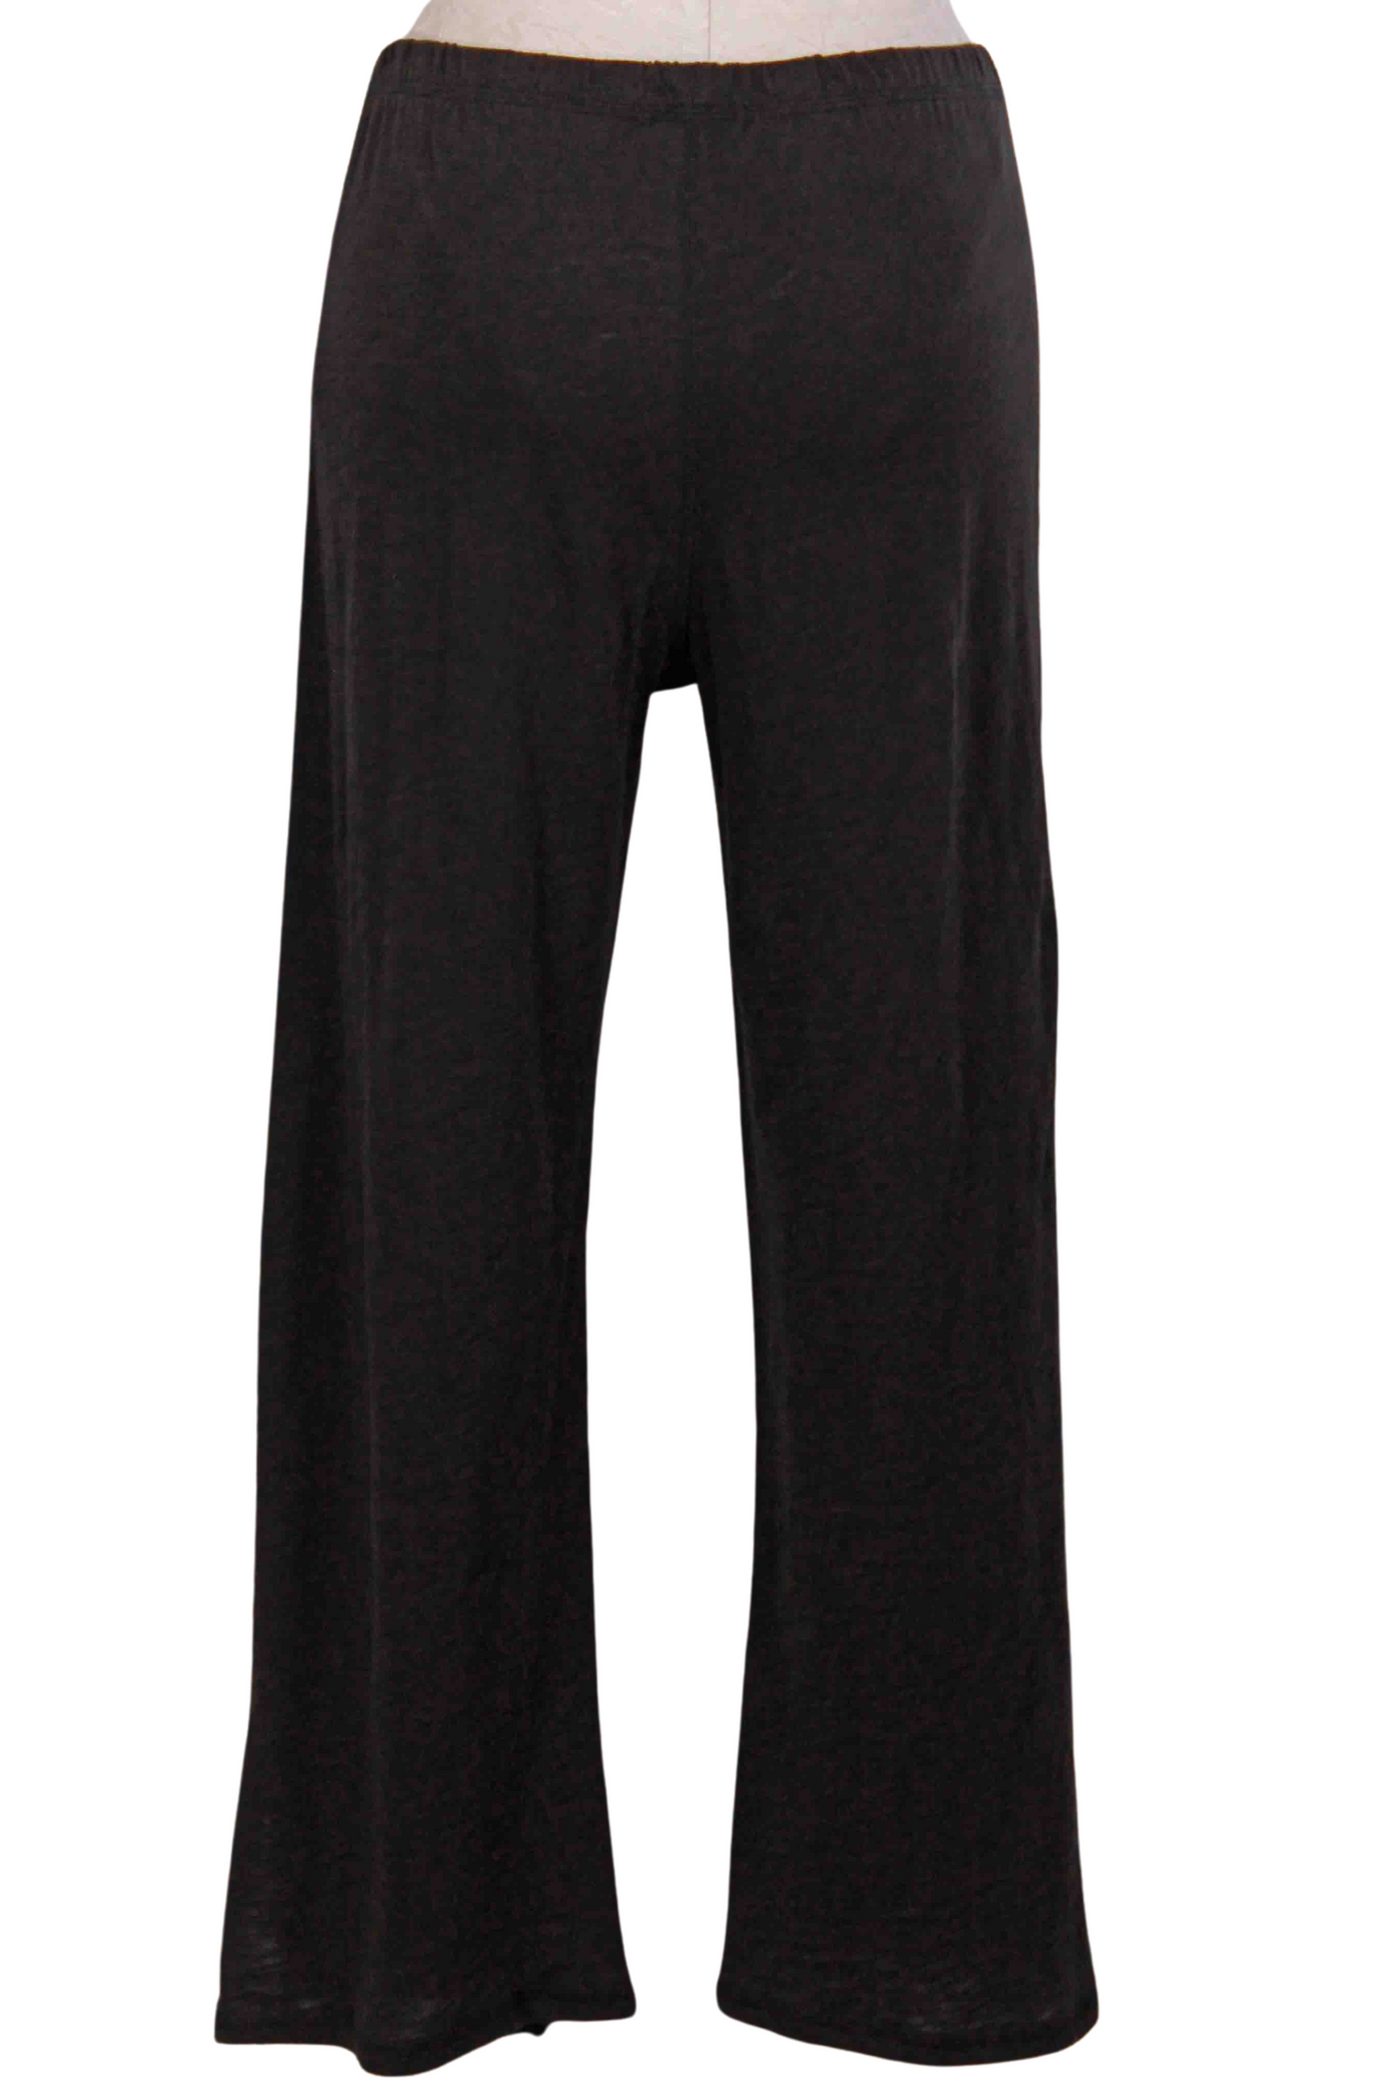 back view of Black colored The Everywhere Crop Pant by Habitat